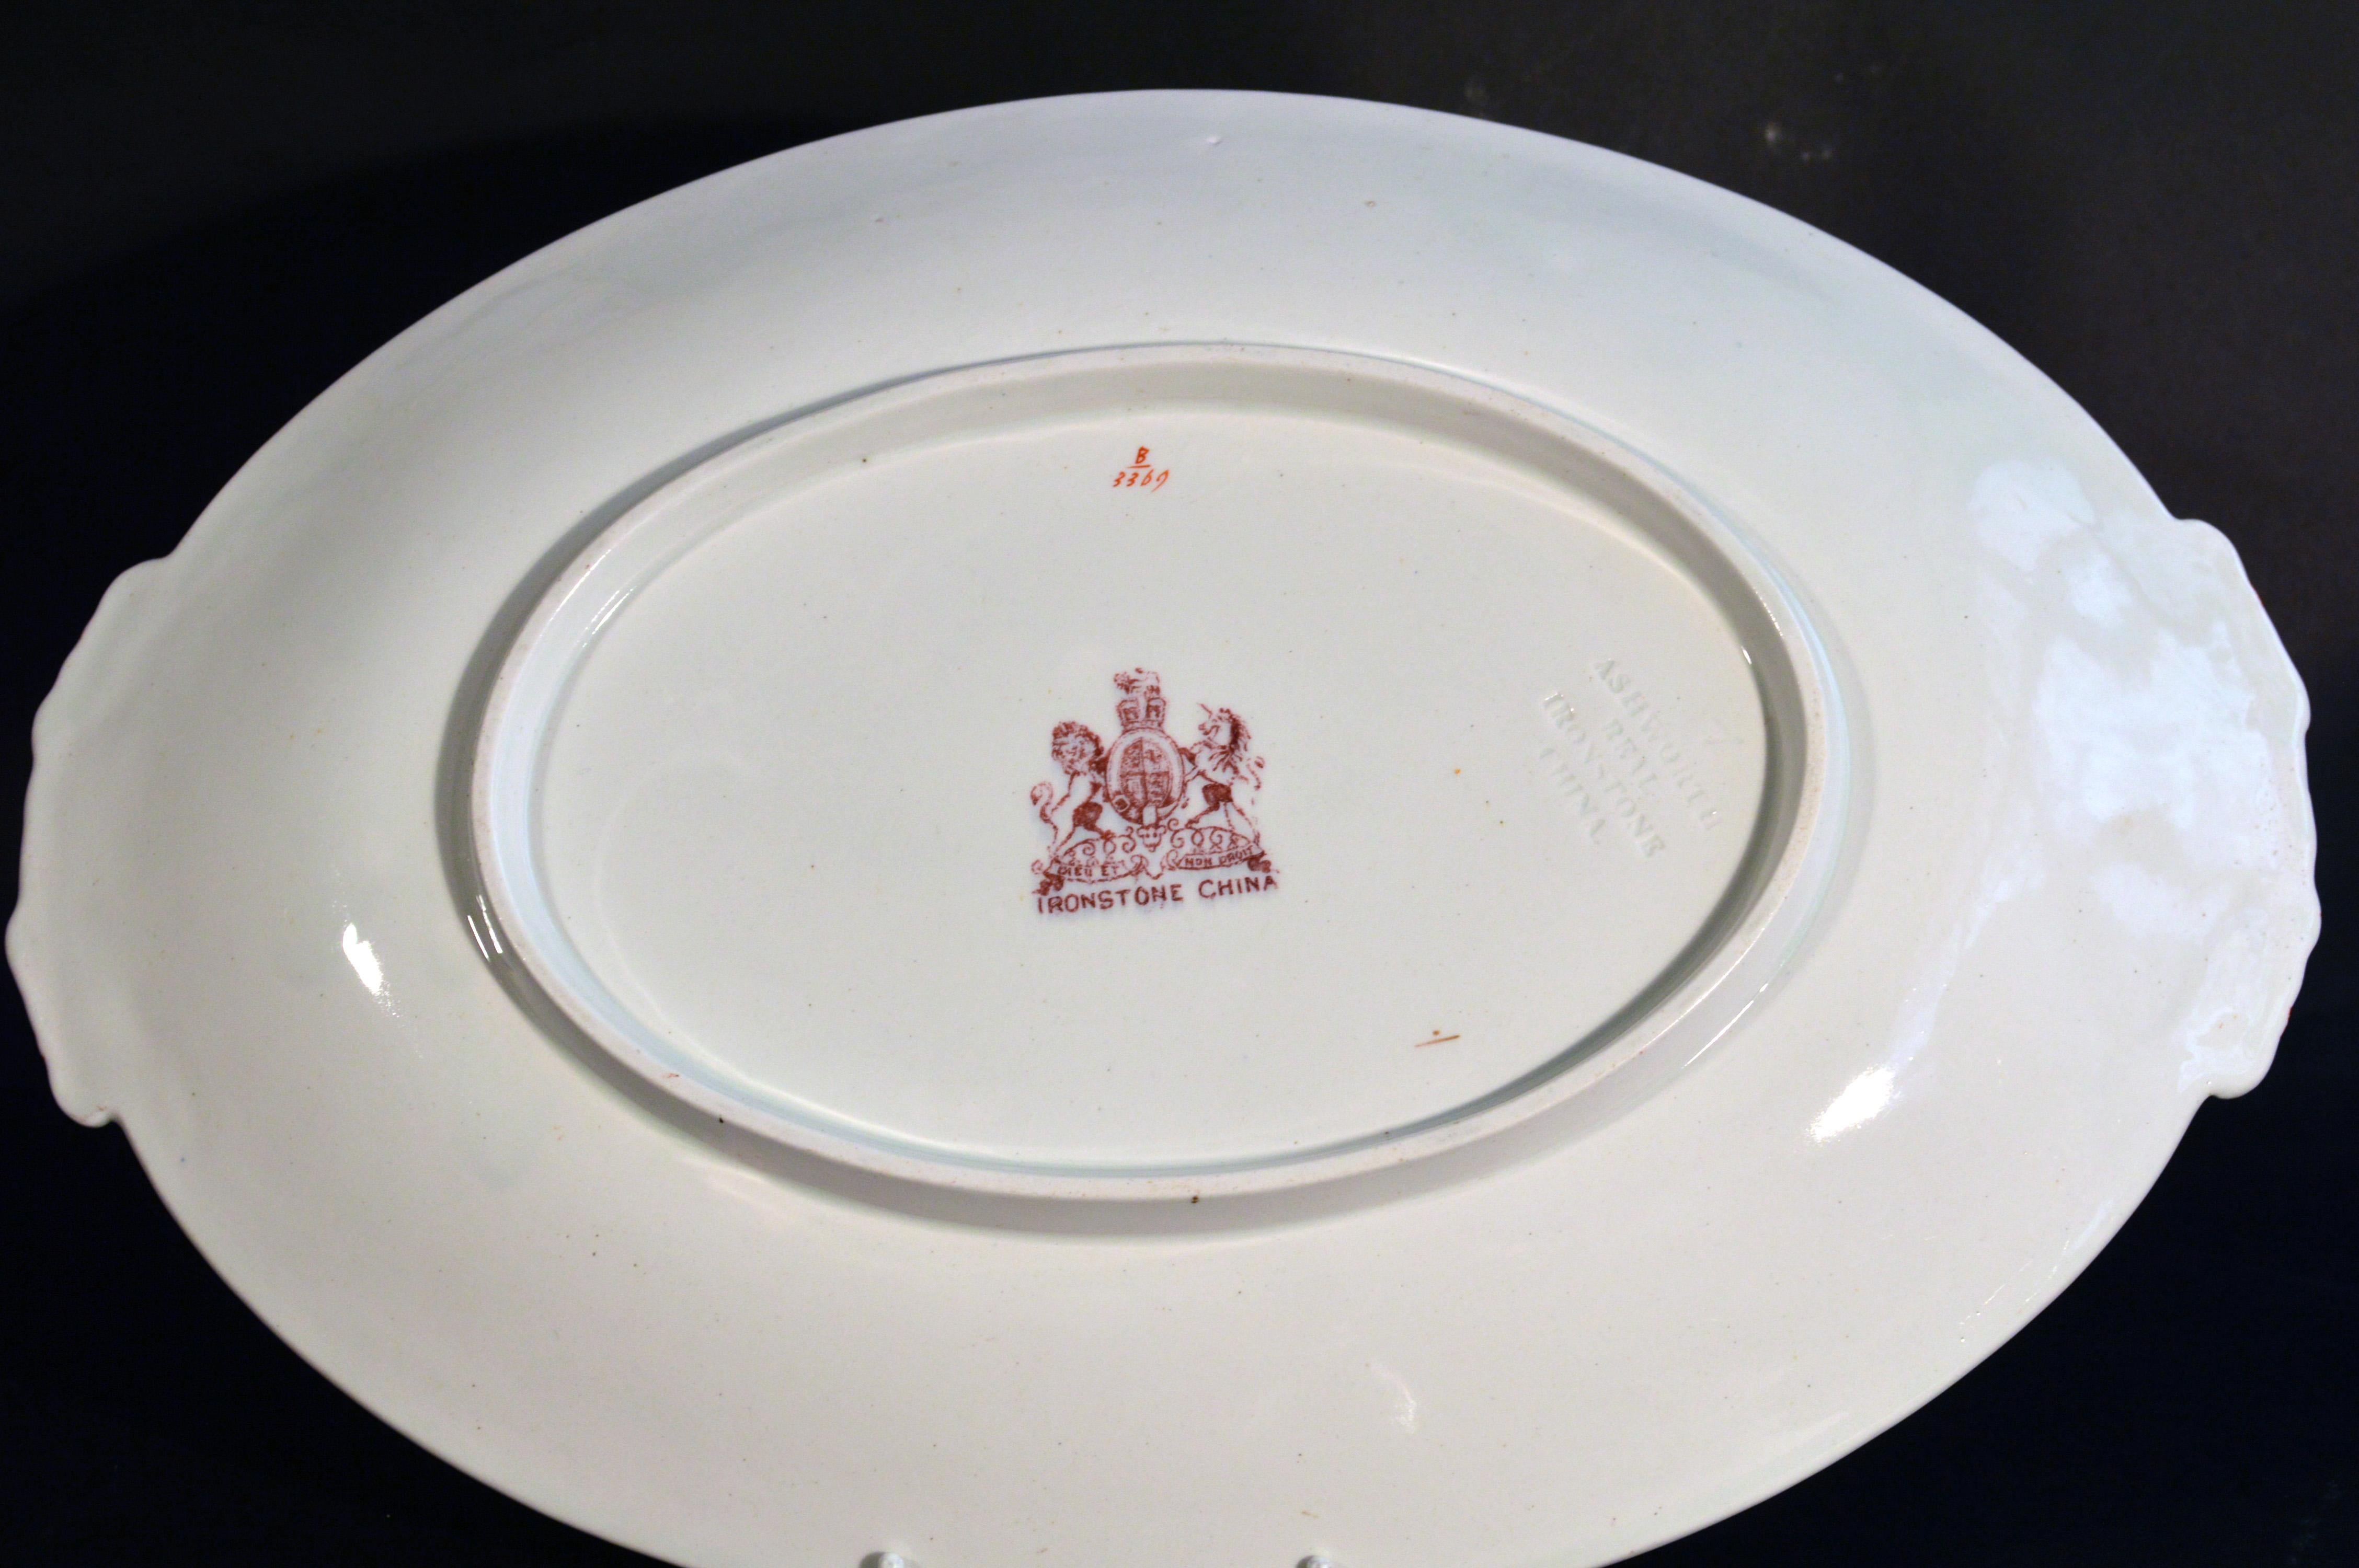 Ashworth Brothers Ironstone Dinner Service, circa 1893, Forty-Five Pieces, 2